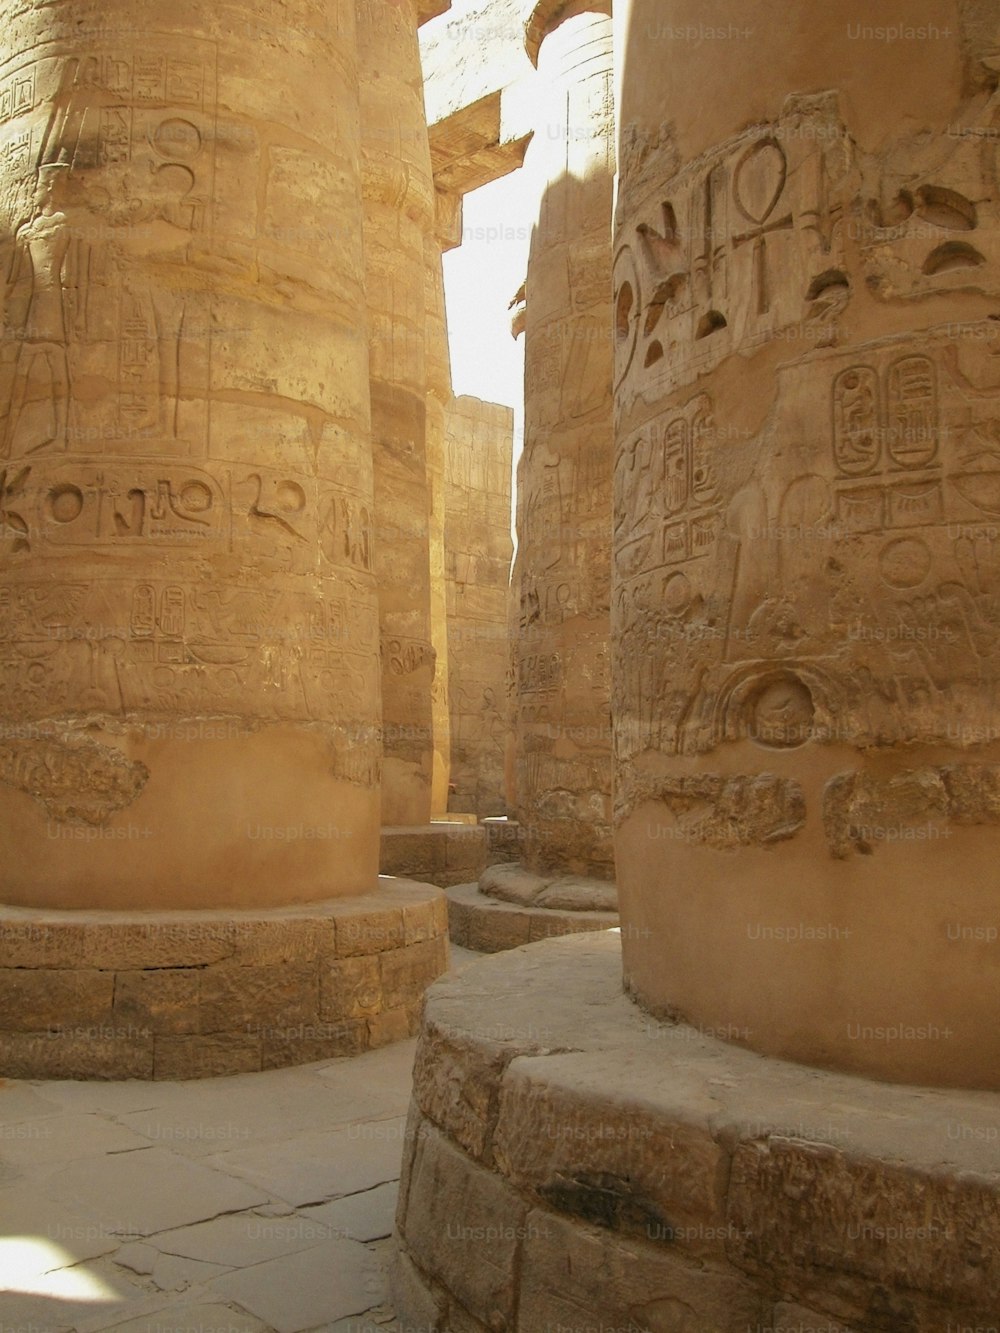 the columns of the temple are carved with ancient egyptian writing